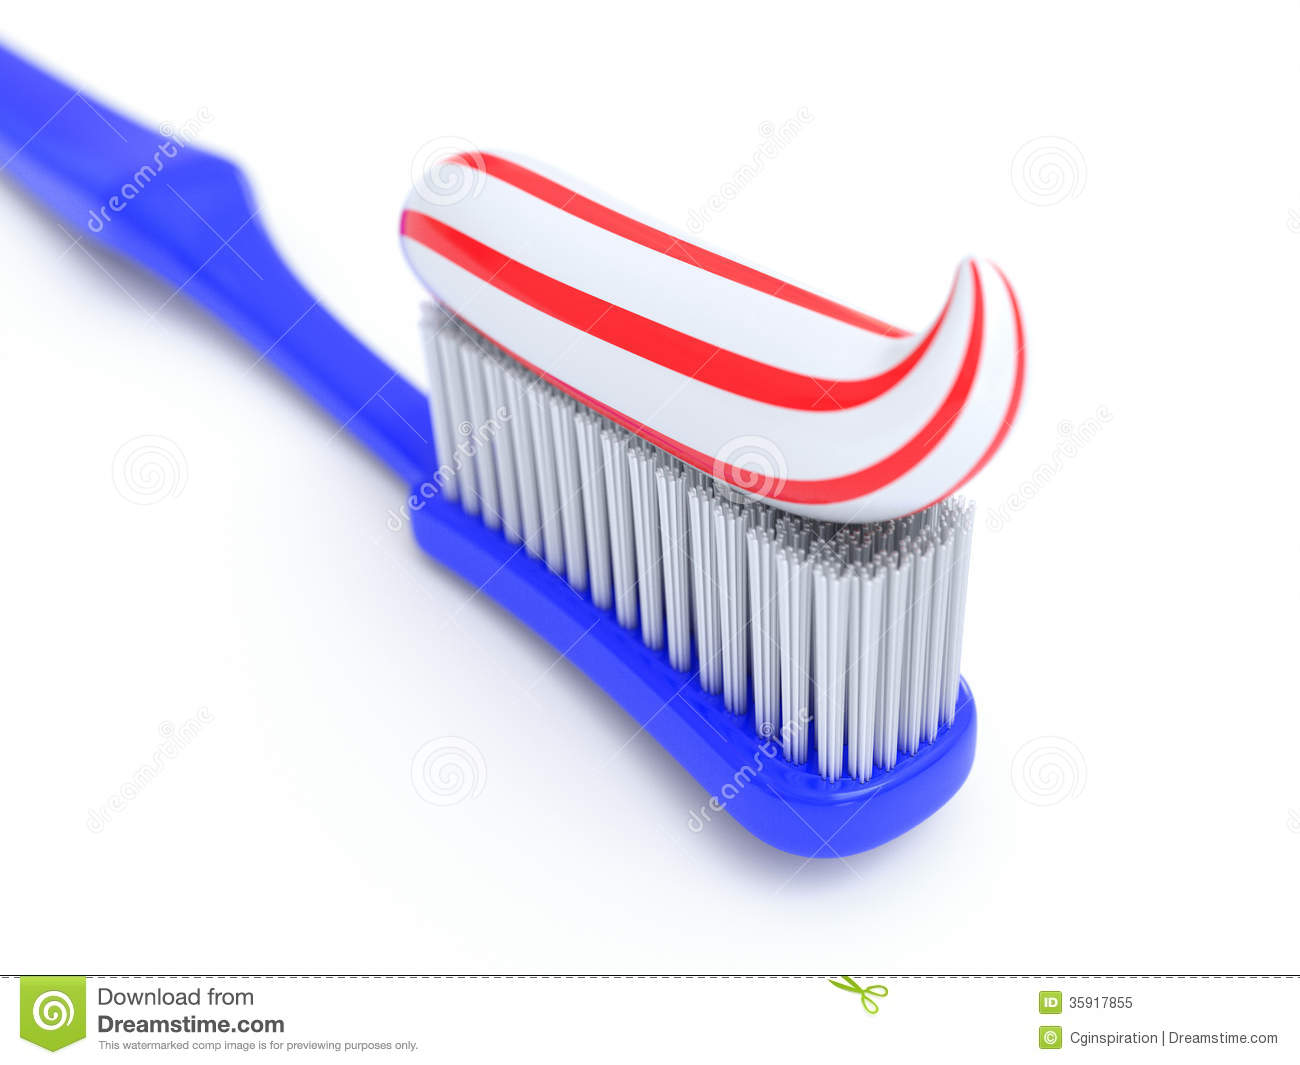 Toothbrush And Toothpaste Royalty Free Stock Photo   Image  35917855